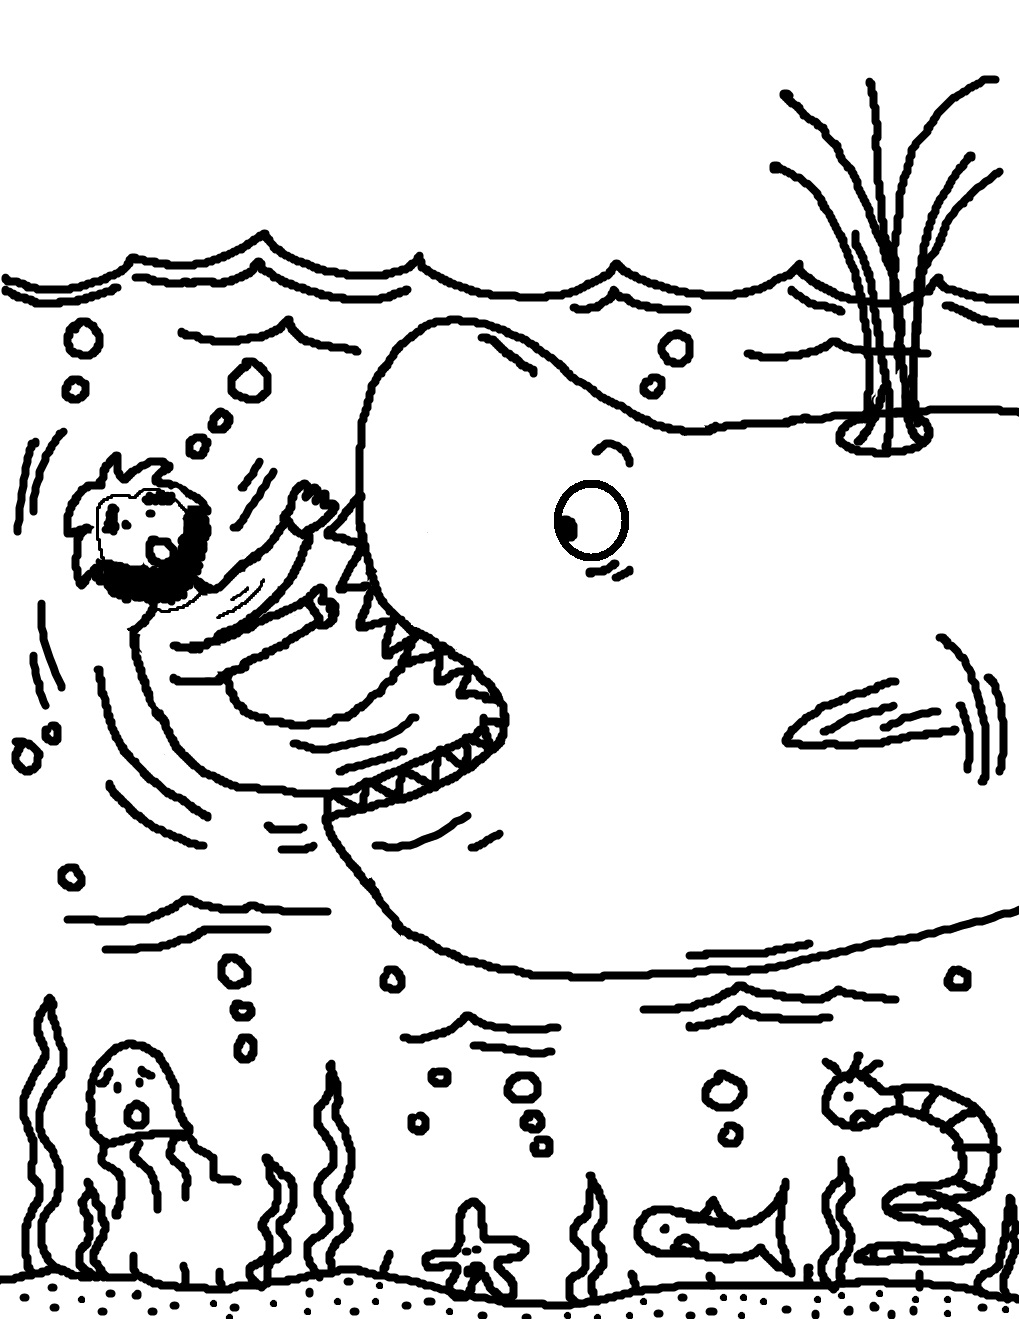 jonah and the whale coloring page jonah and the whale coloring pages the whale and jonah page coloring 